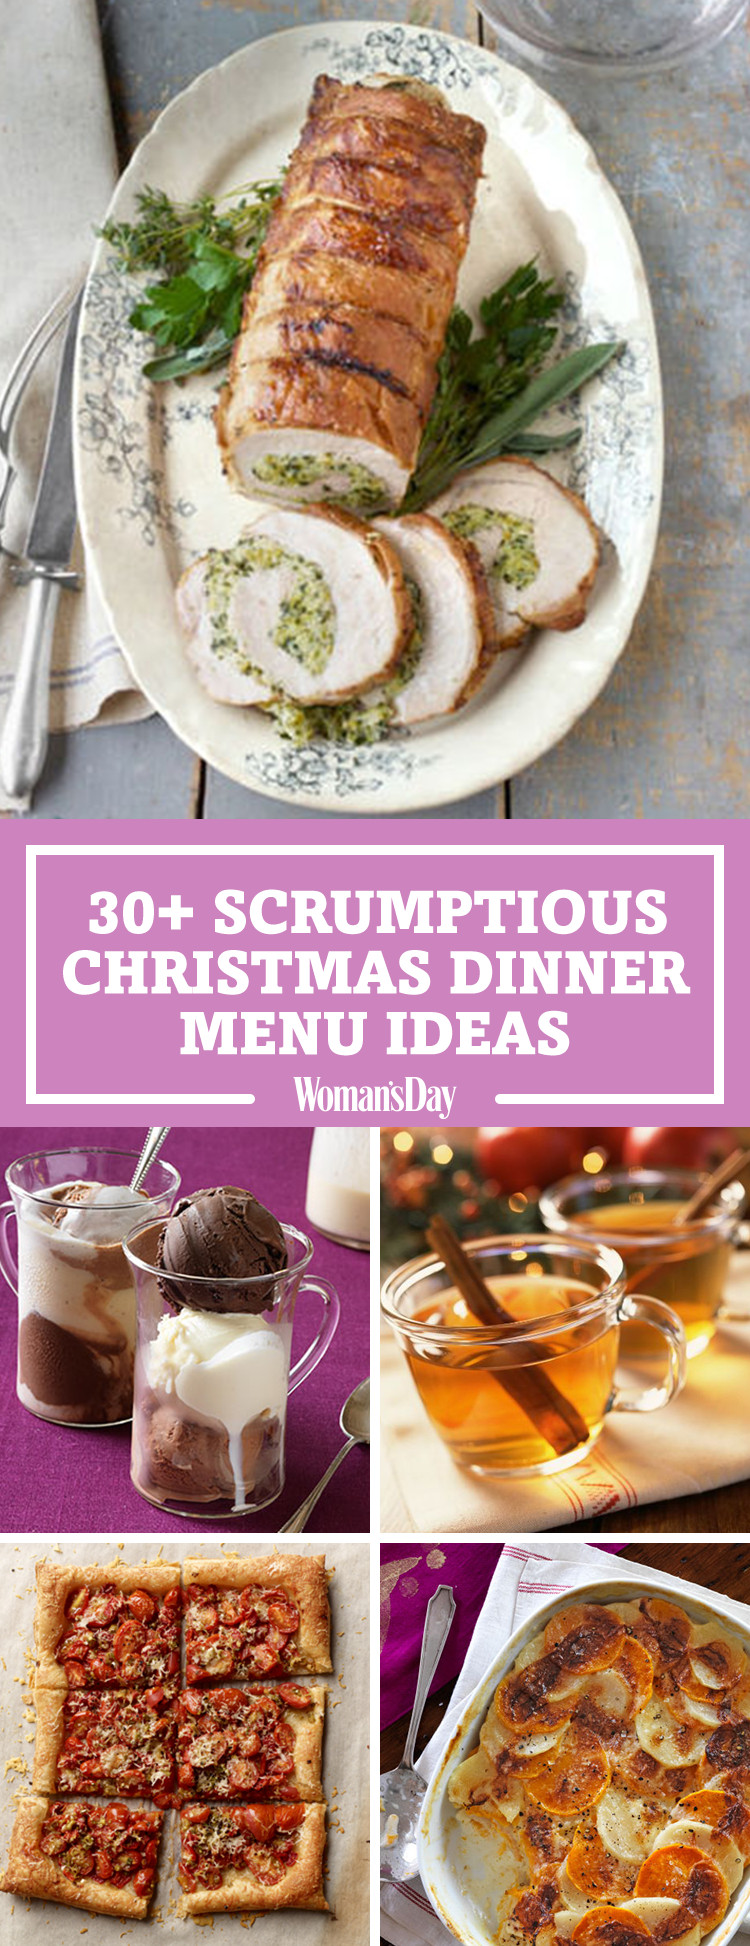 Best Christmas Dinners
 Best Christmas Dinner Menu Ideas for 2017